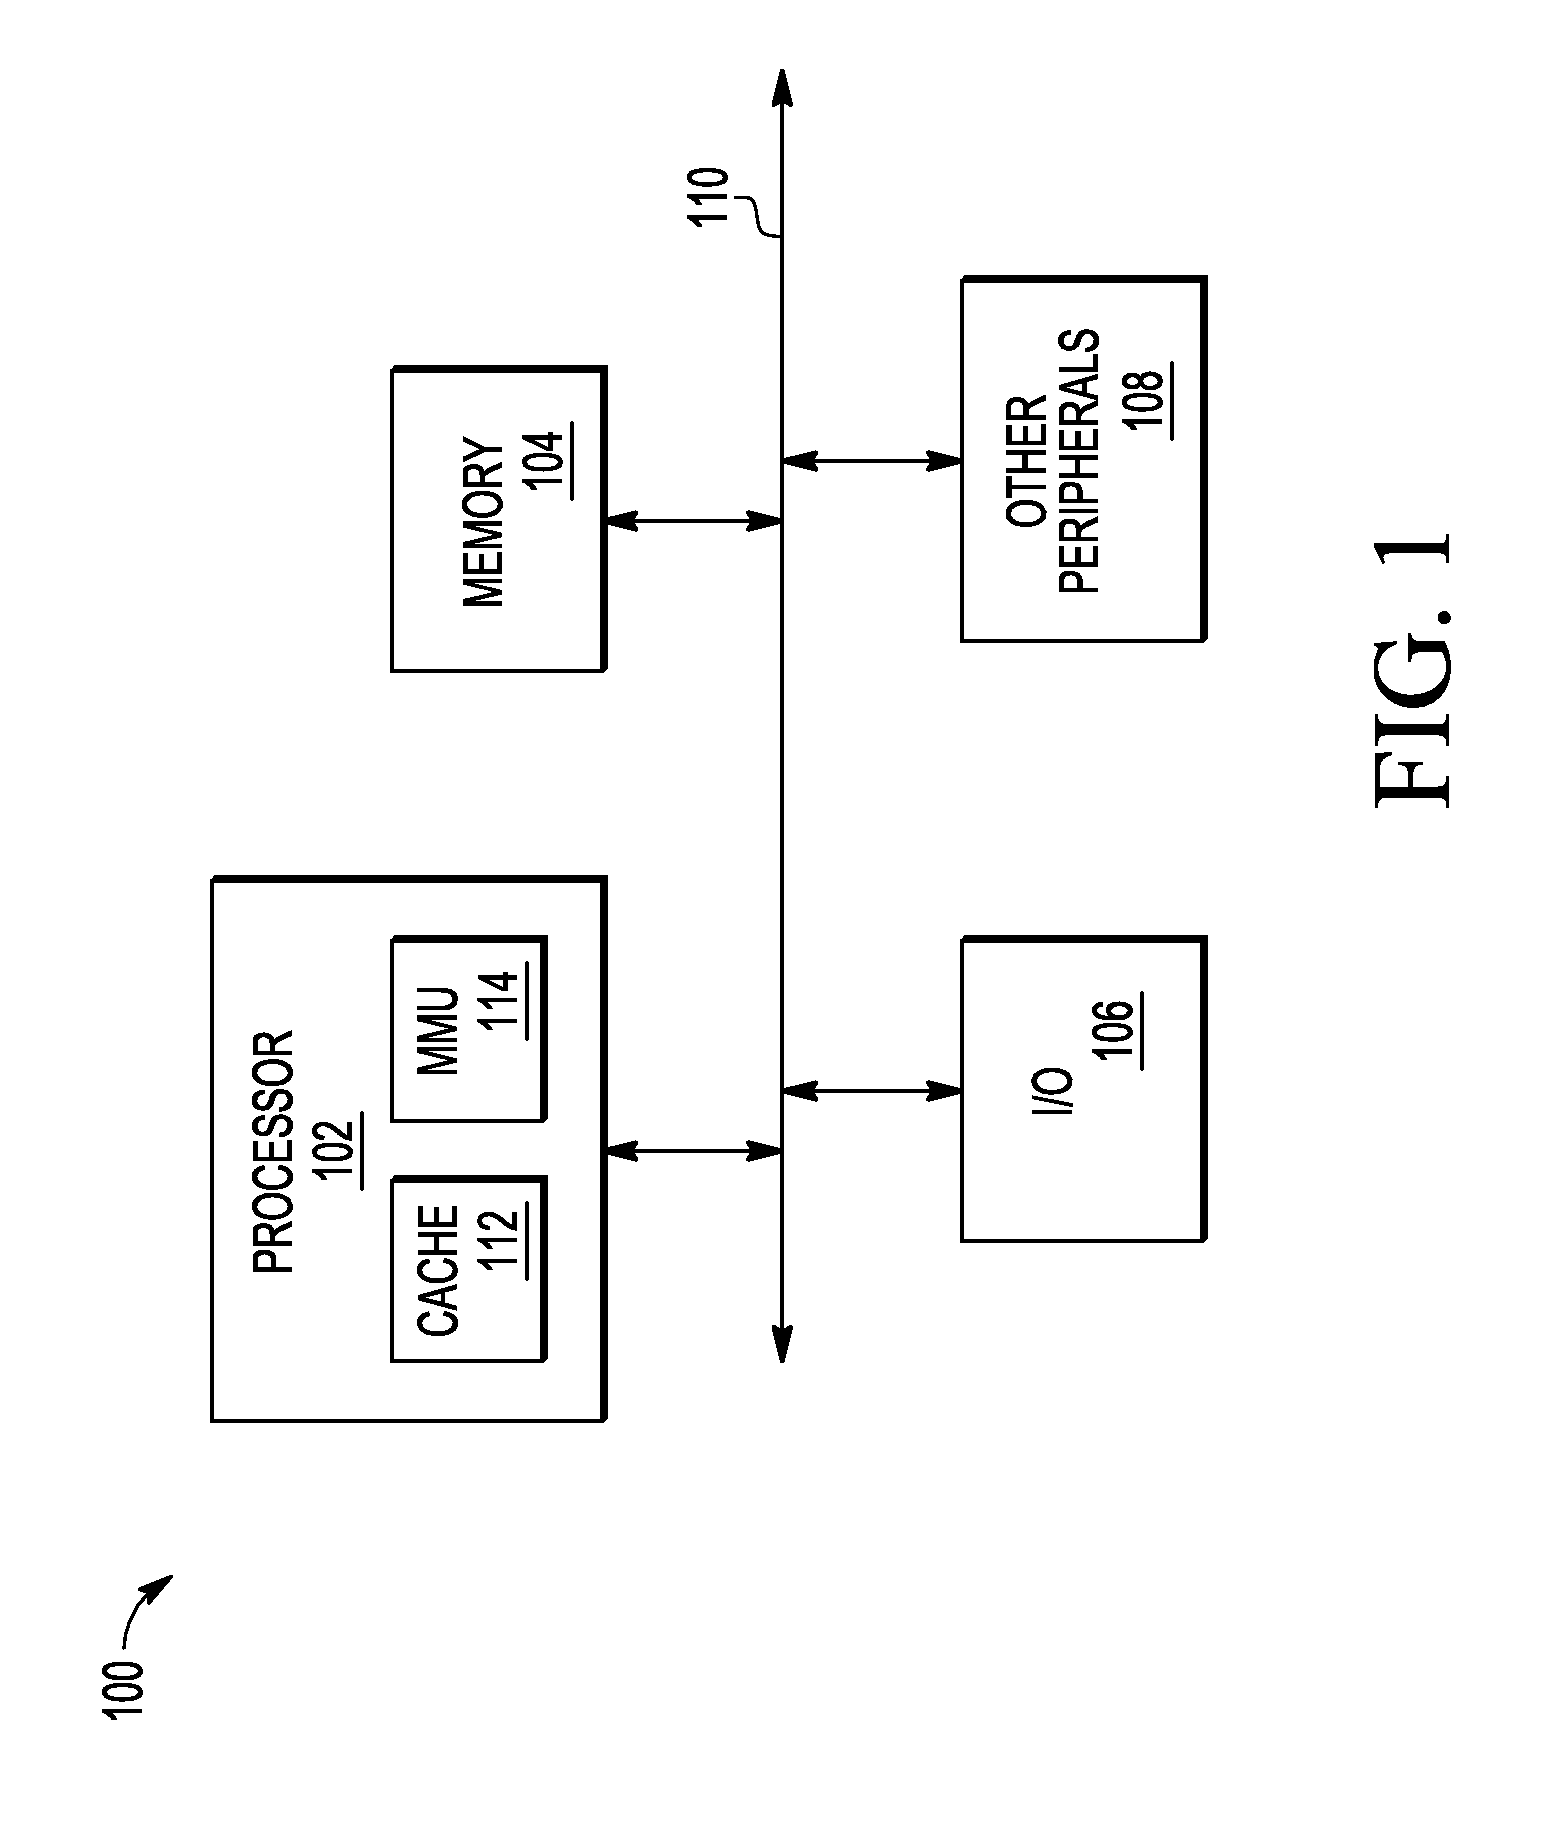 Data processing system with latency tolerance execution